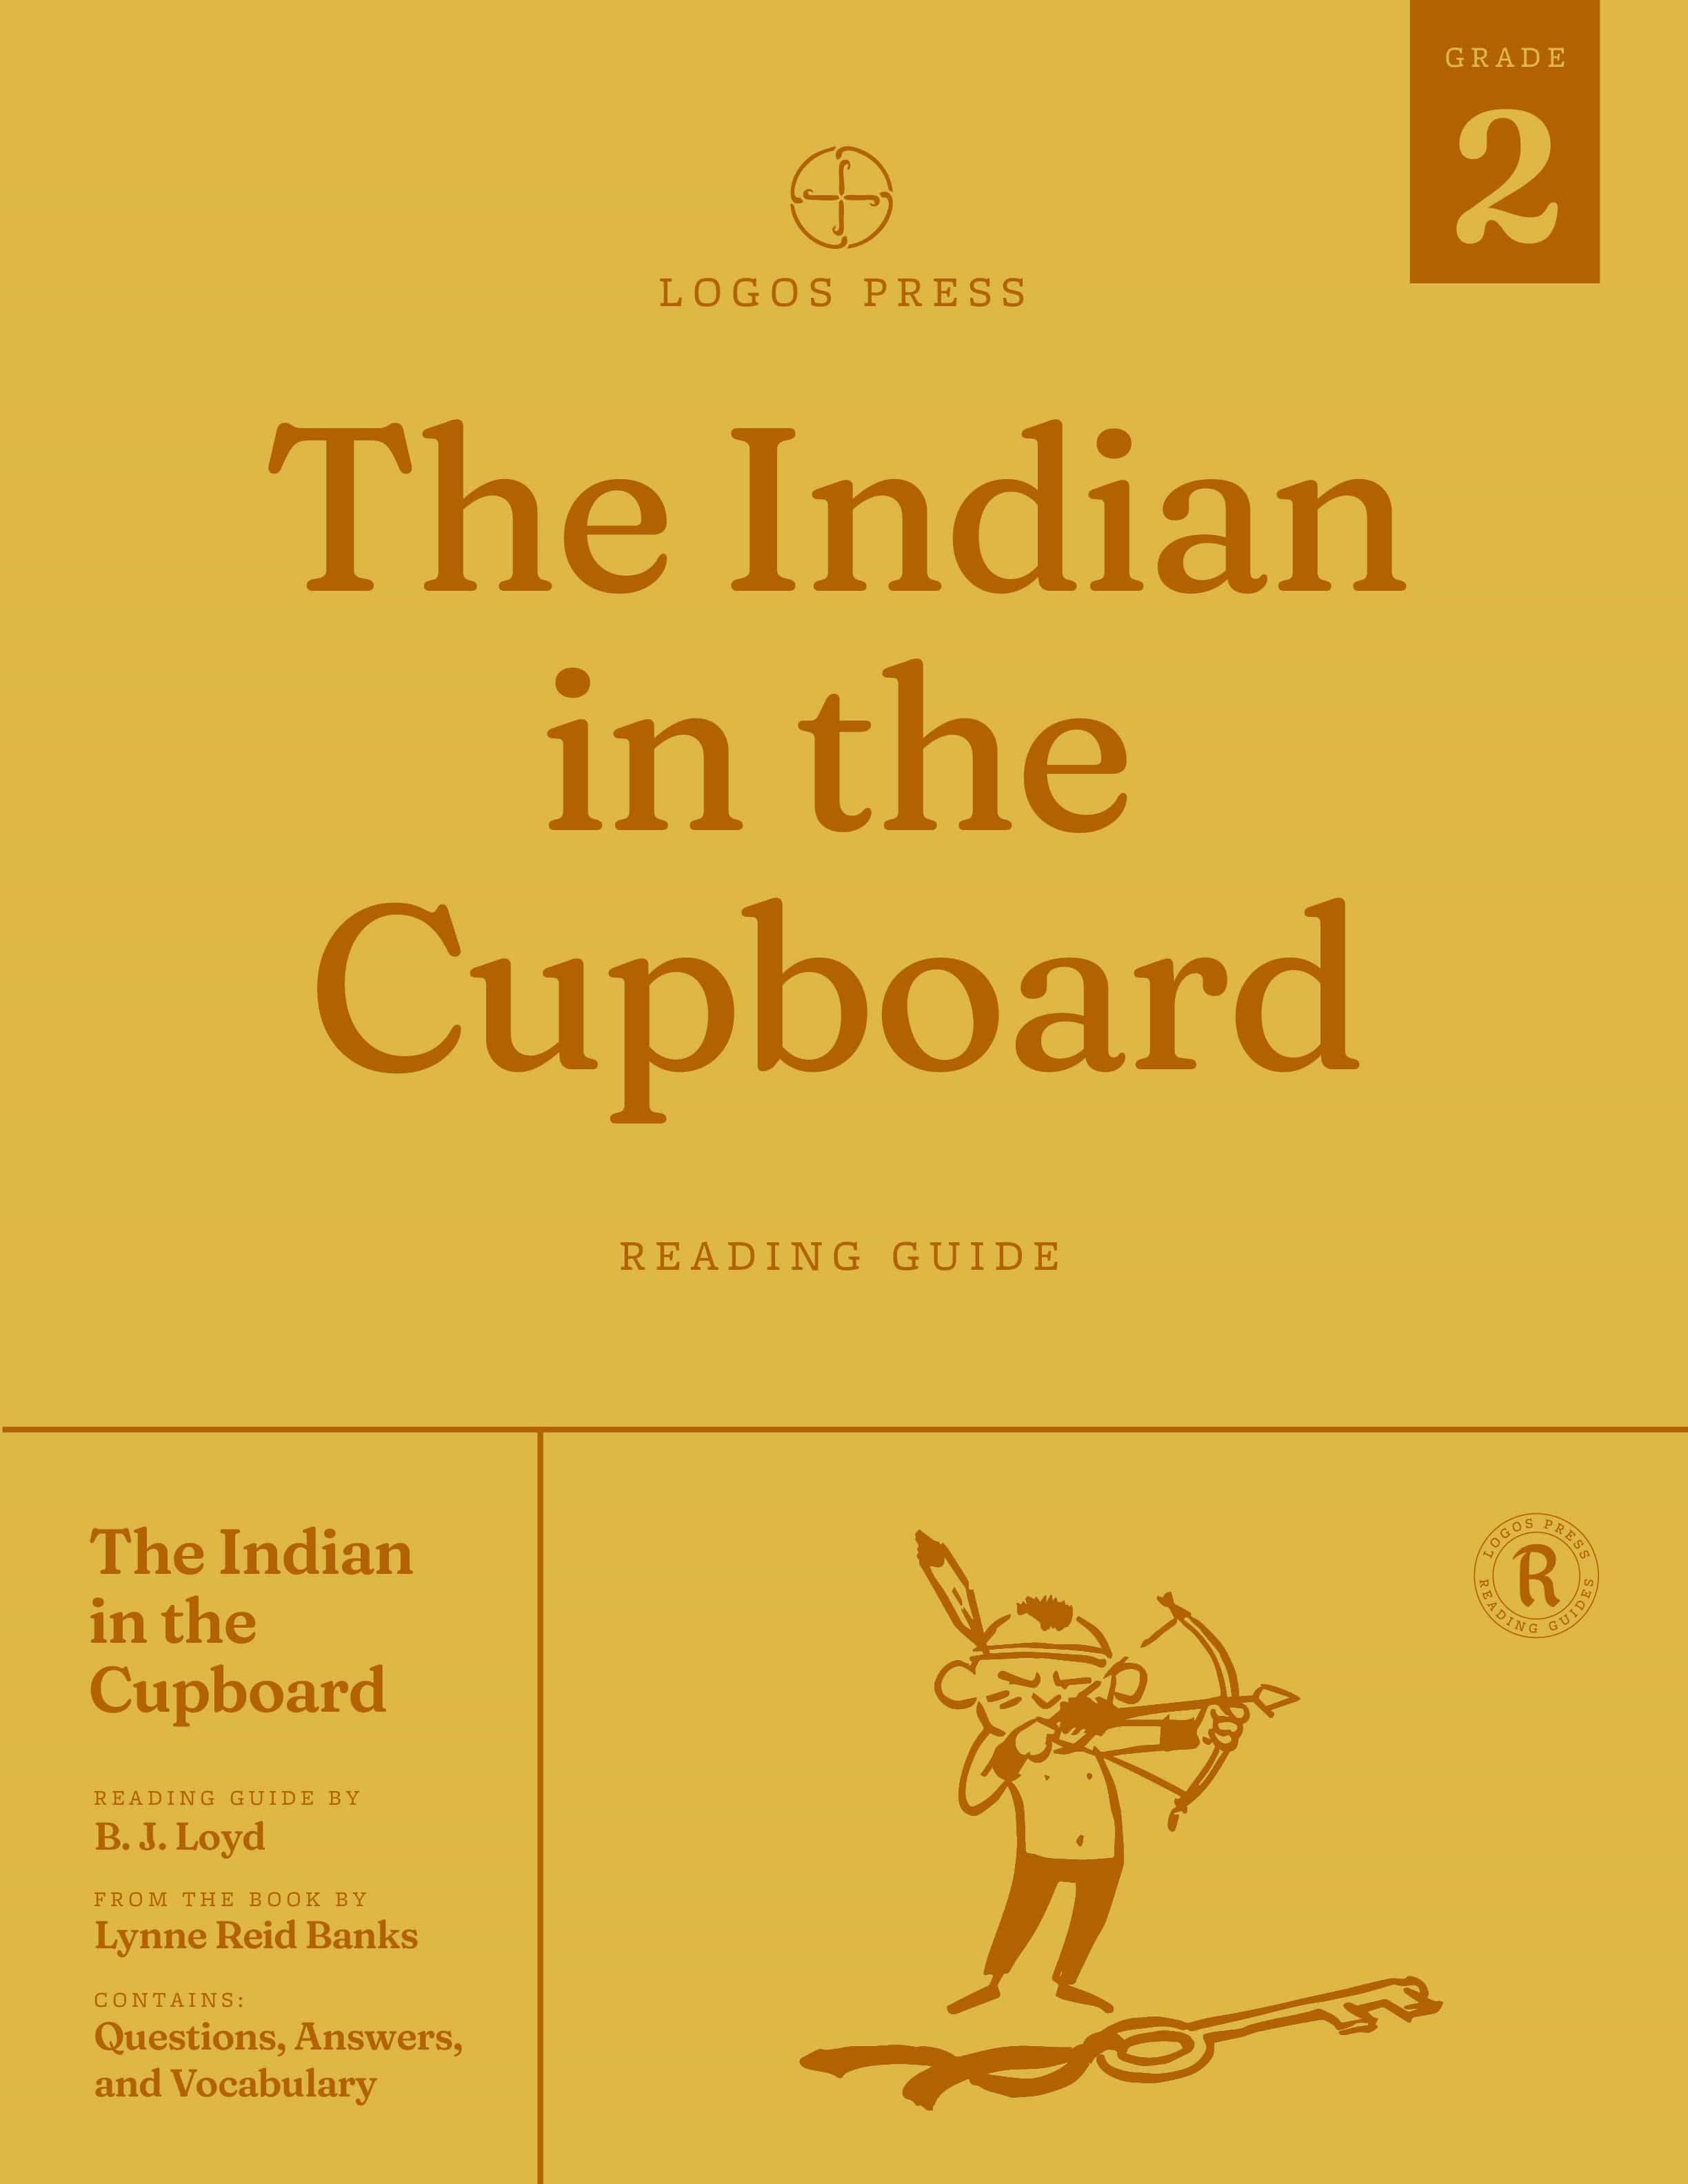 The Indian in the Cupboard - Reading Guide (Download)